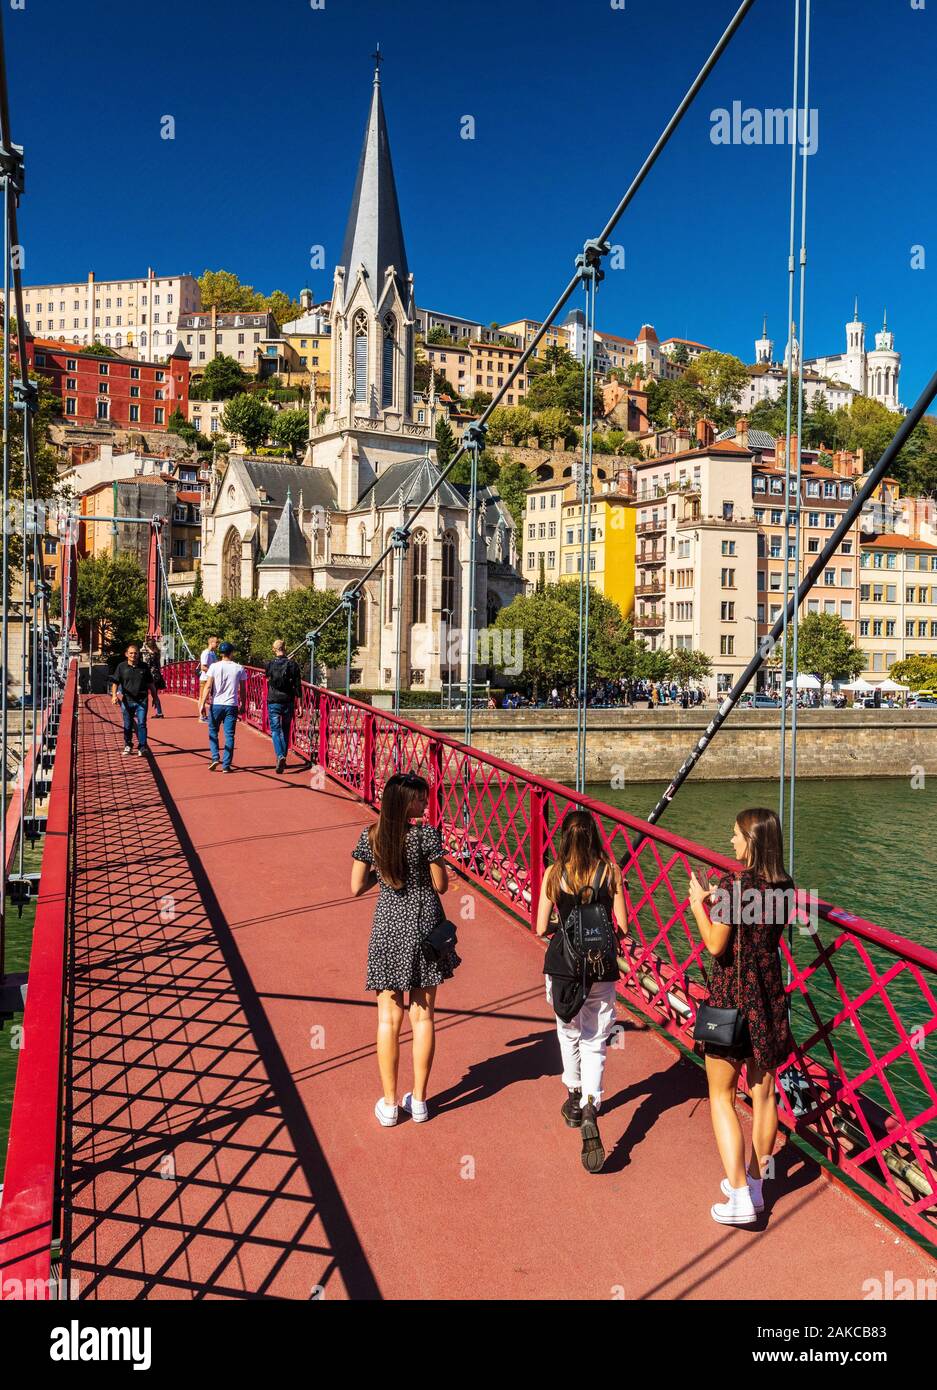 France, Rhone, Lyon, historic centre classified as a UNESCO World Heritage site, Paul Couturier footbridge over the Saone river, Saint-Georges church and Notre-Dame de Fourviere in the background Stock Photo